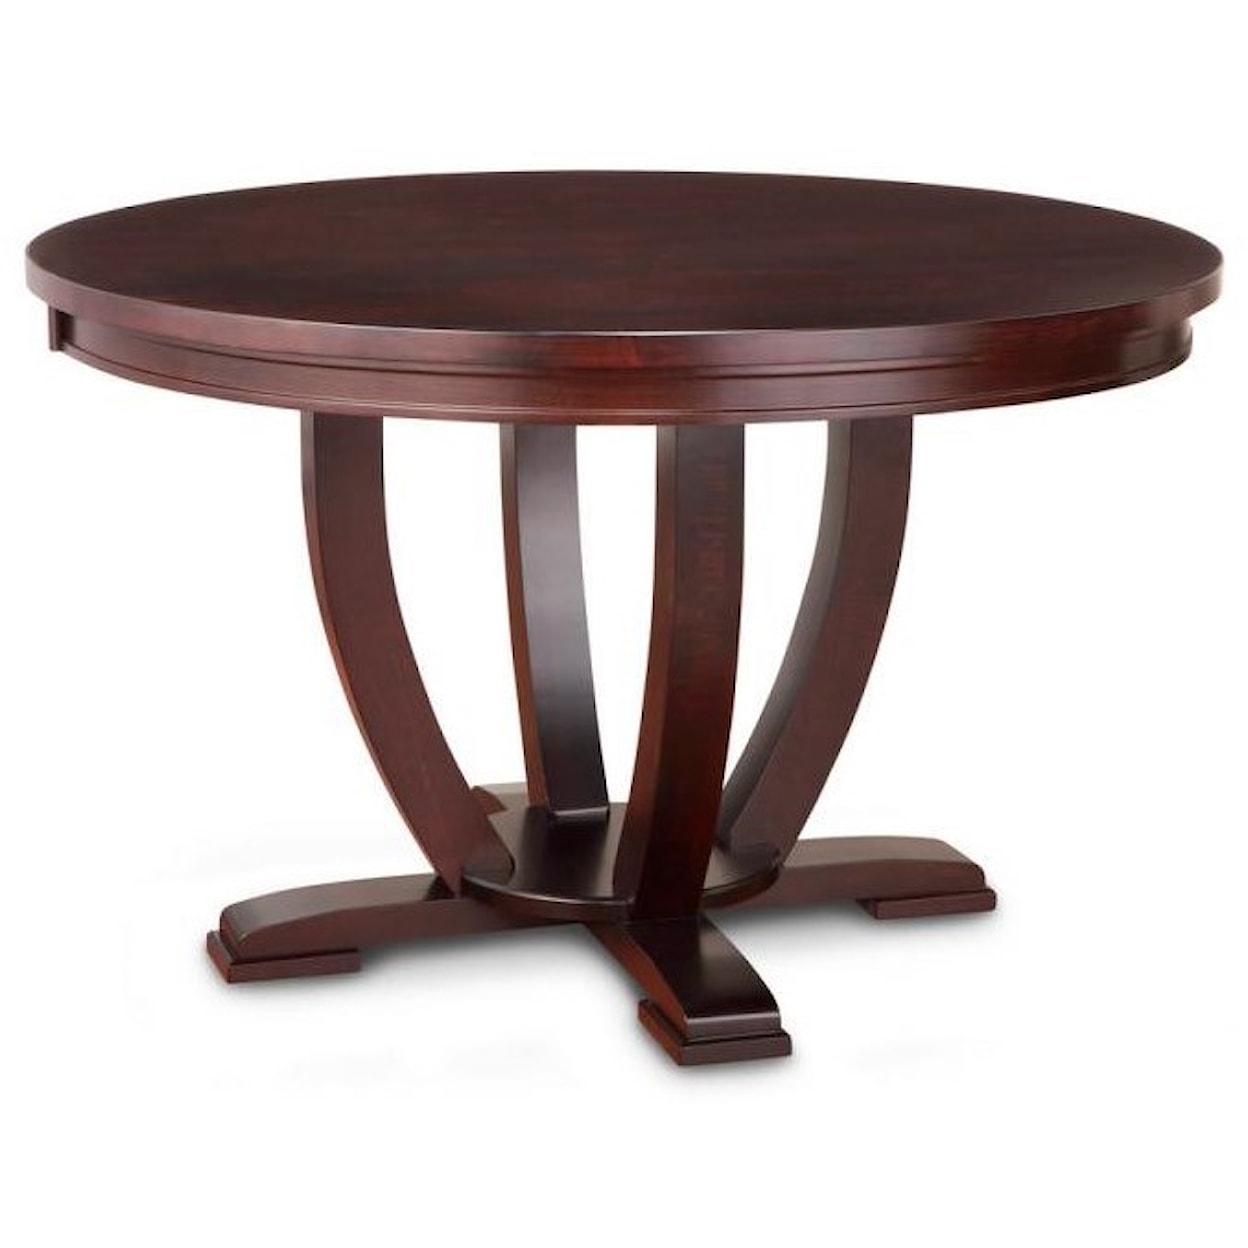 Handstone Florence 54" Solid Top Round Dining Table